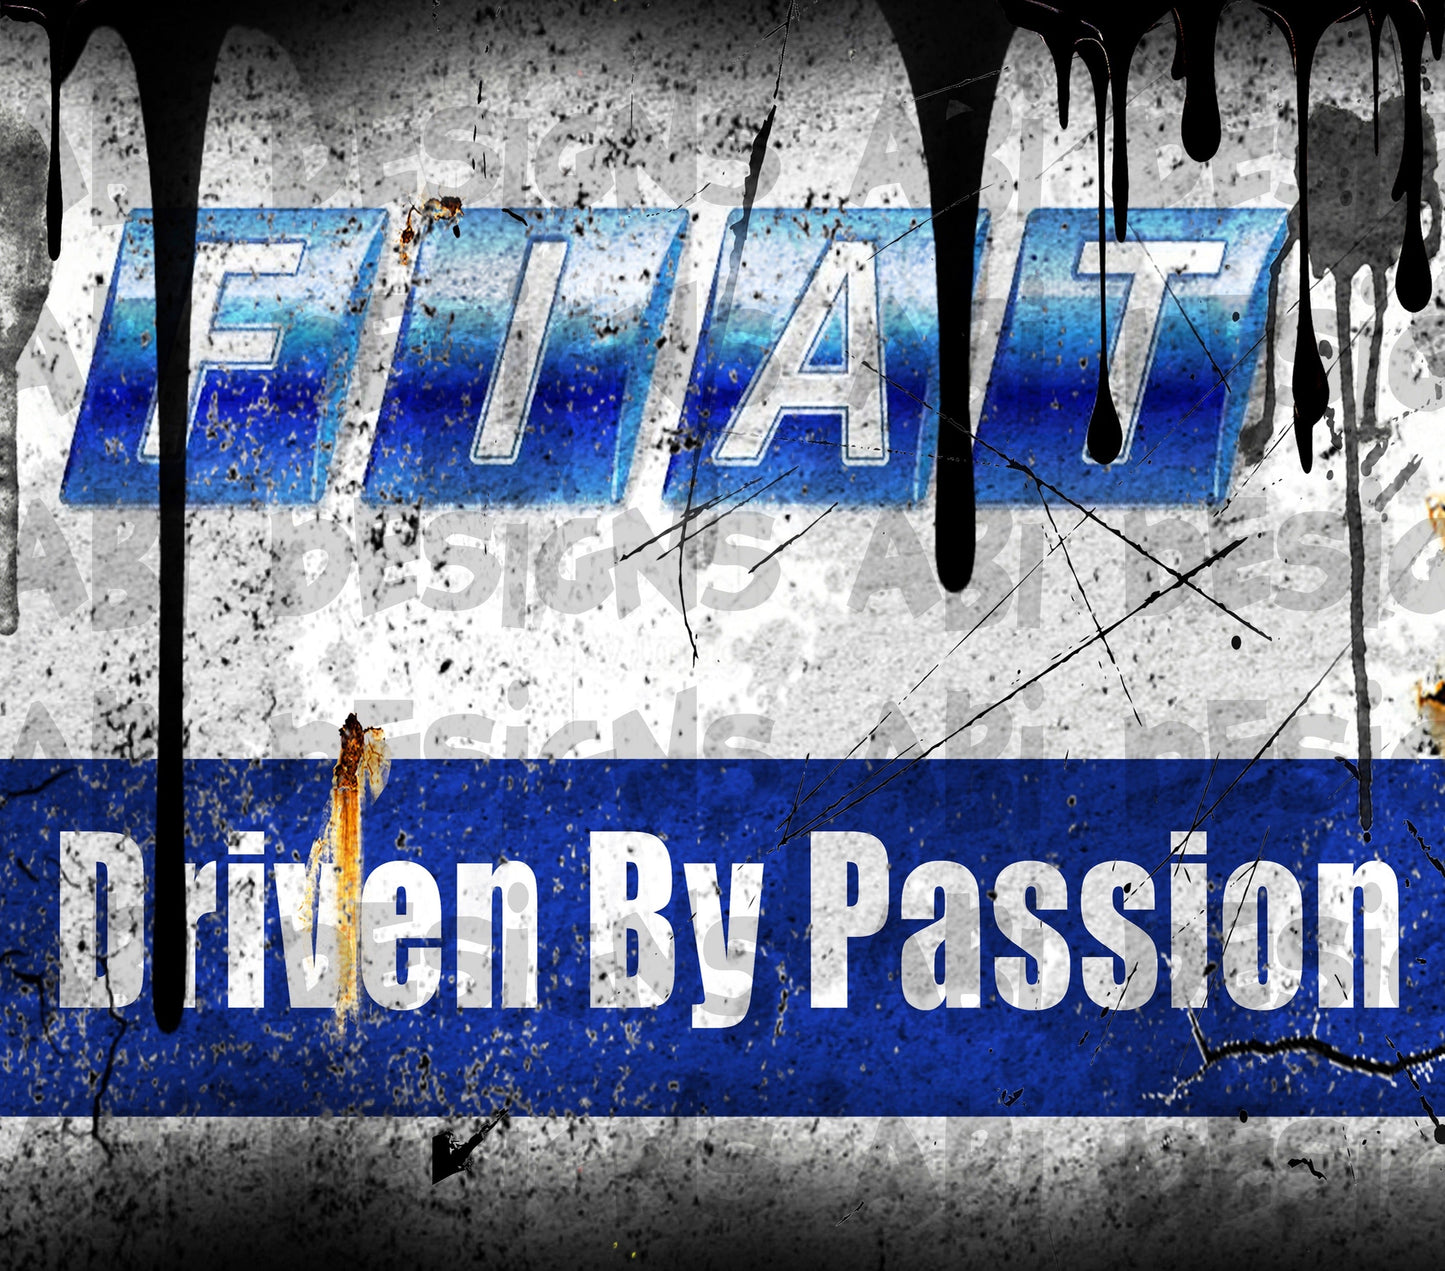 Fiat driven by passion -Sublimation